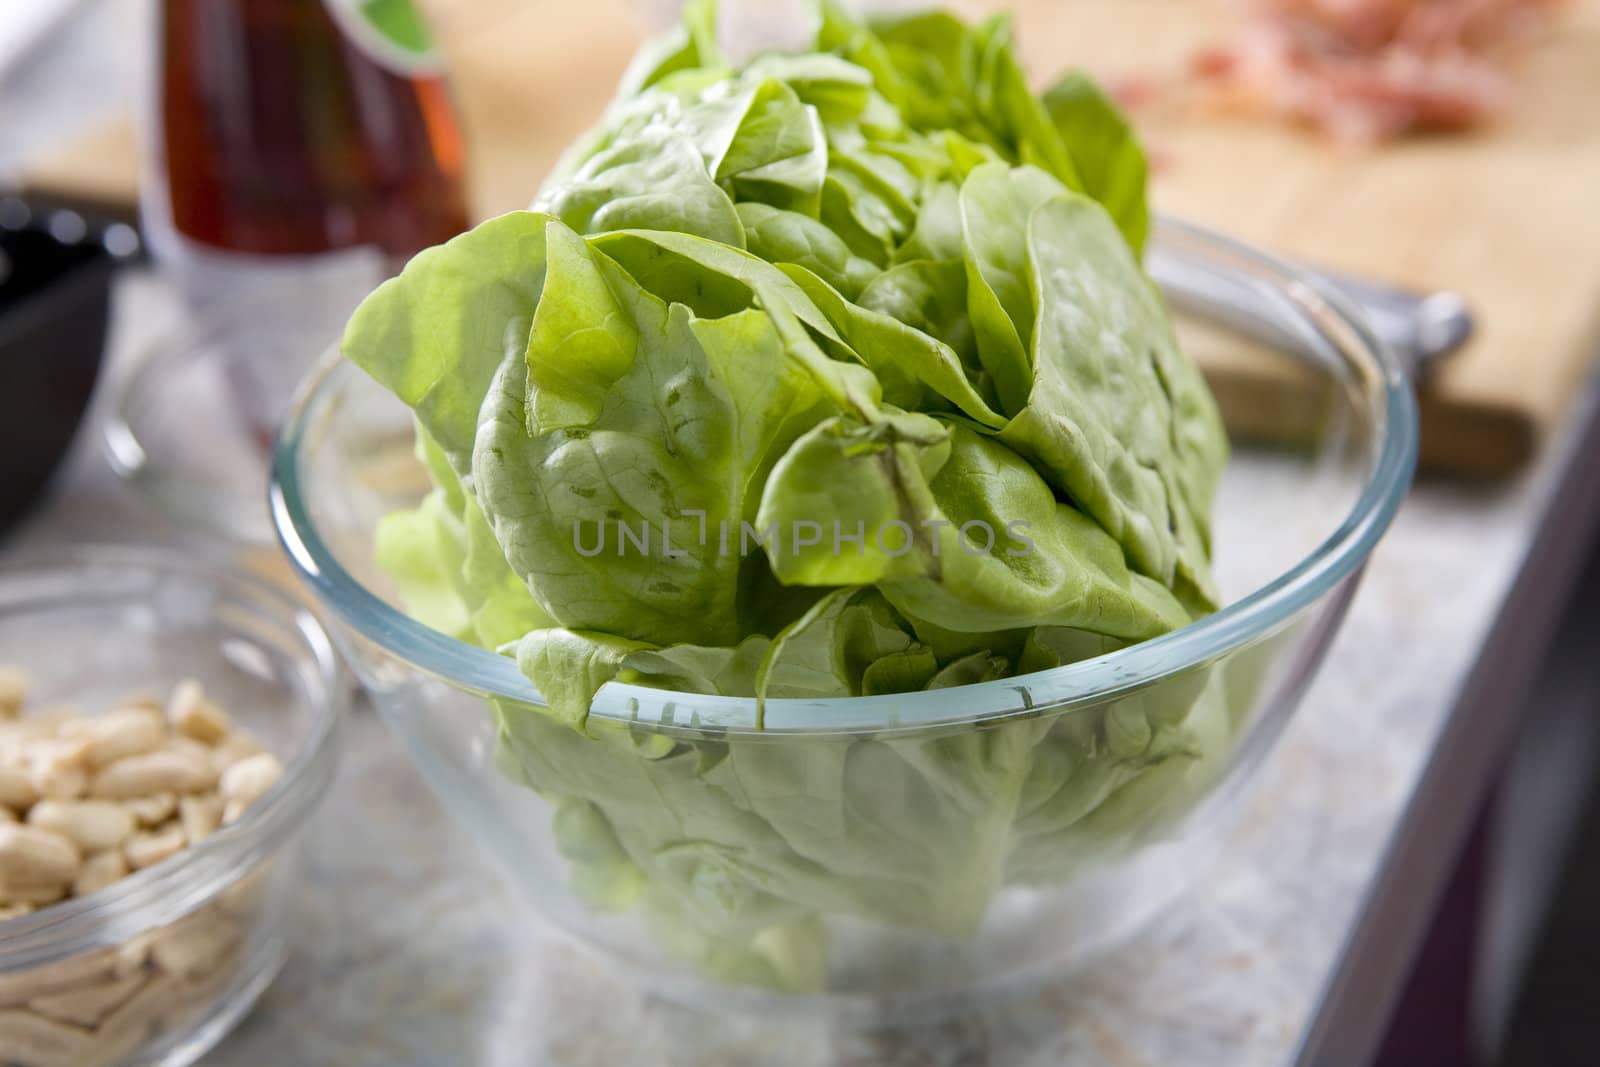 Green salad in a bowl on table before cooking by elenarostunova